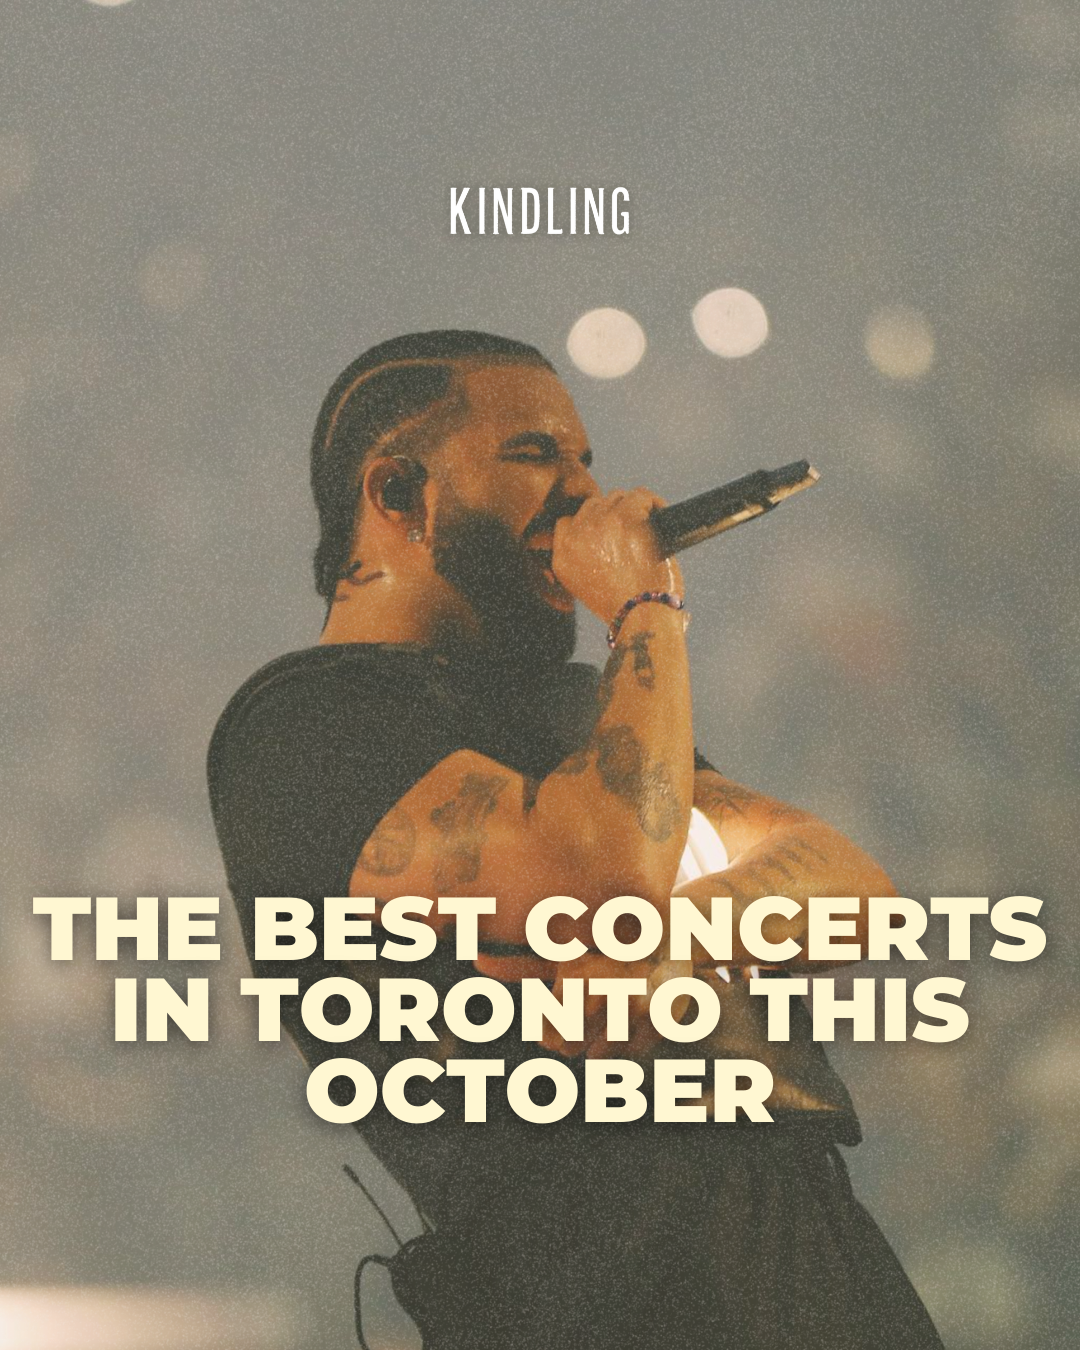 The Best Concerts in Toronto This October